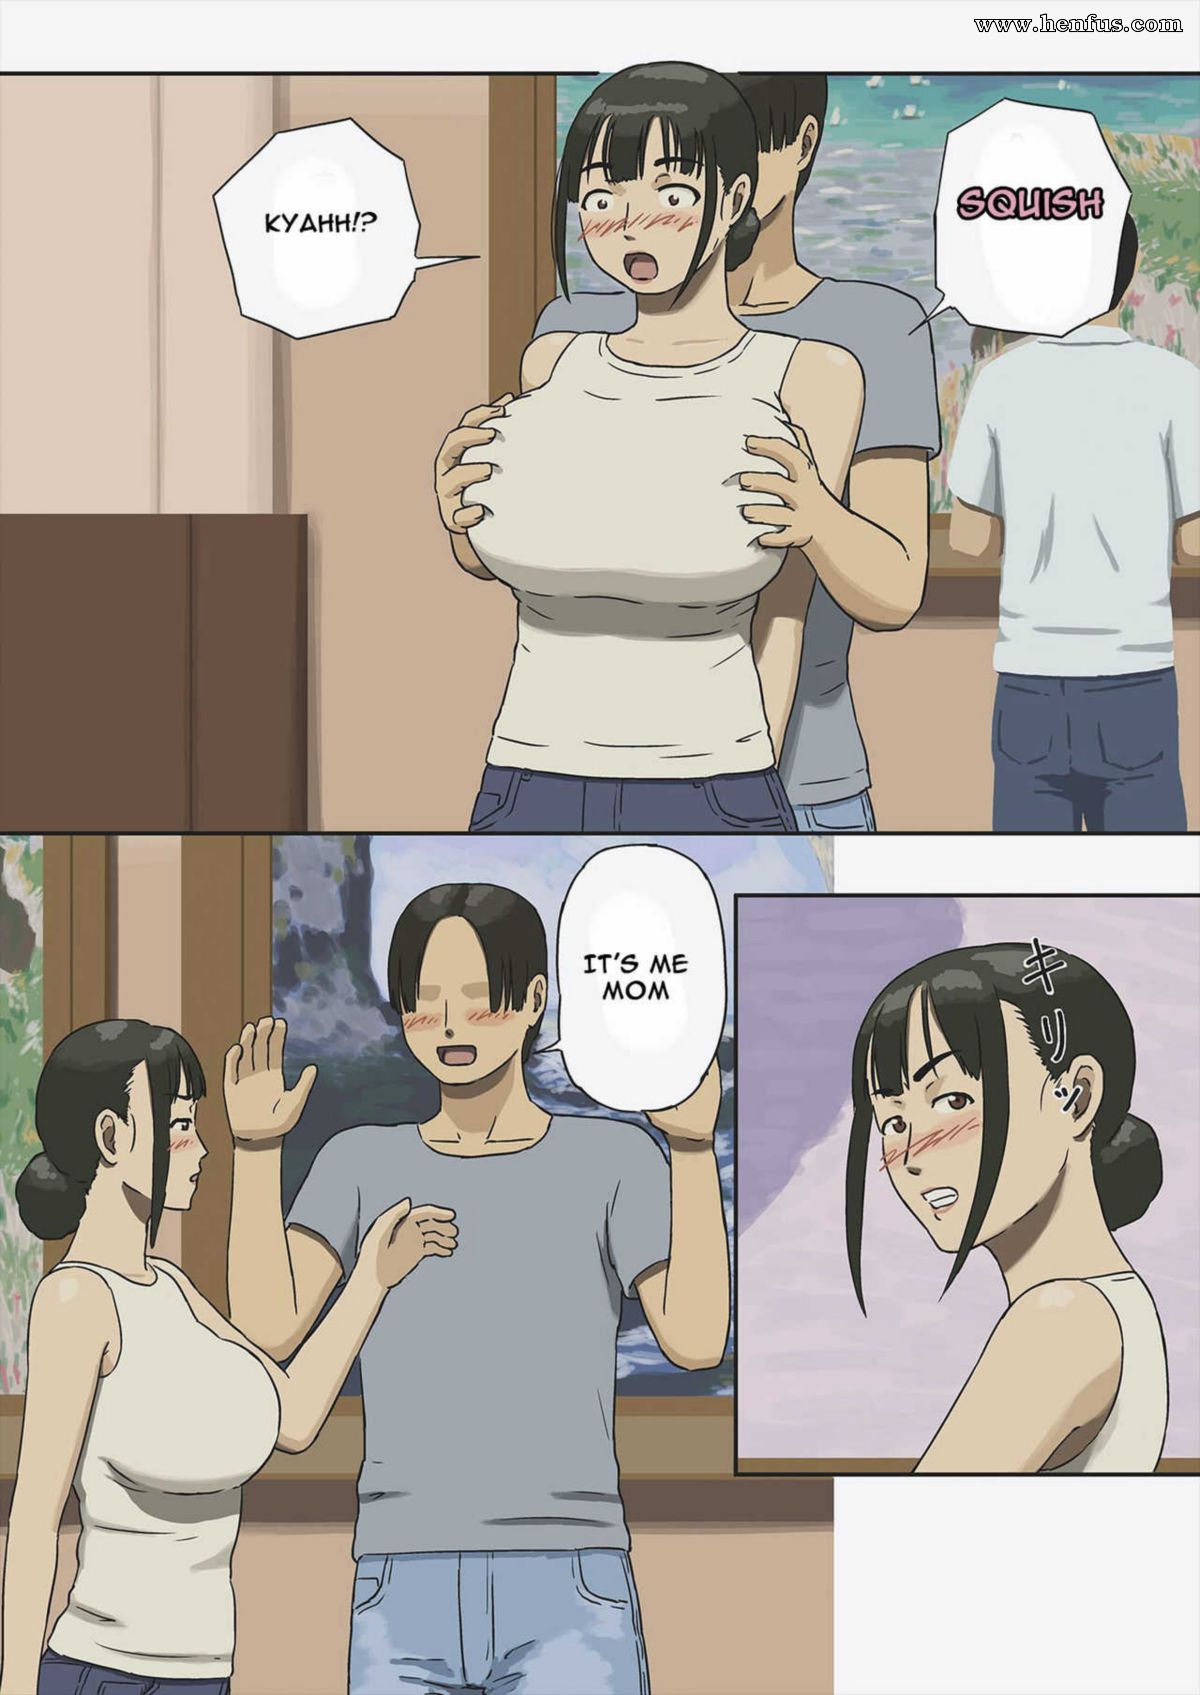 Page 6 Izayoi-no-kiki/Share-2-Does-Mom-Like-To-Be-Fucked-Against-Her-Will Henfus